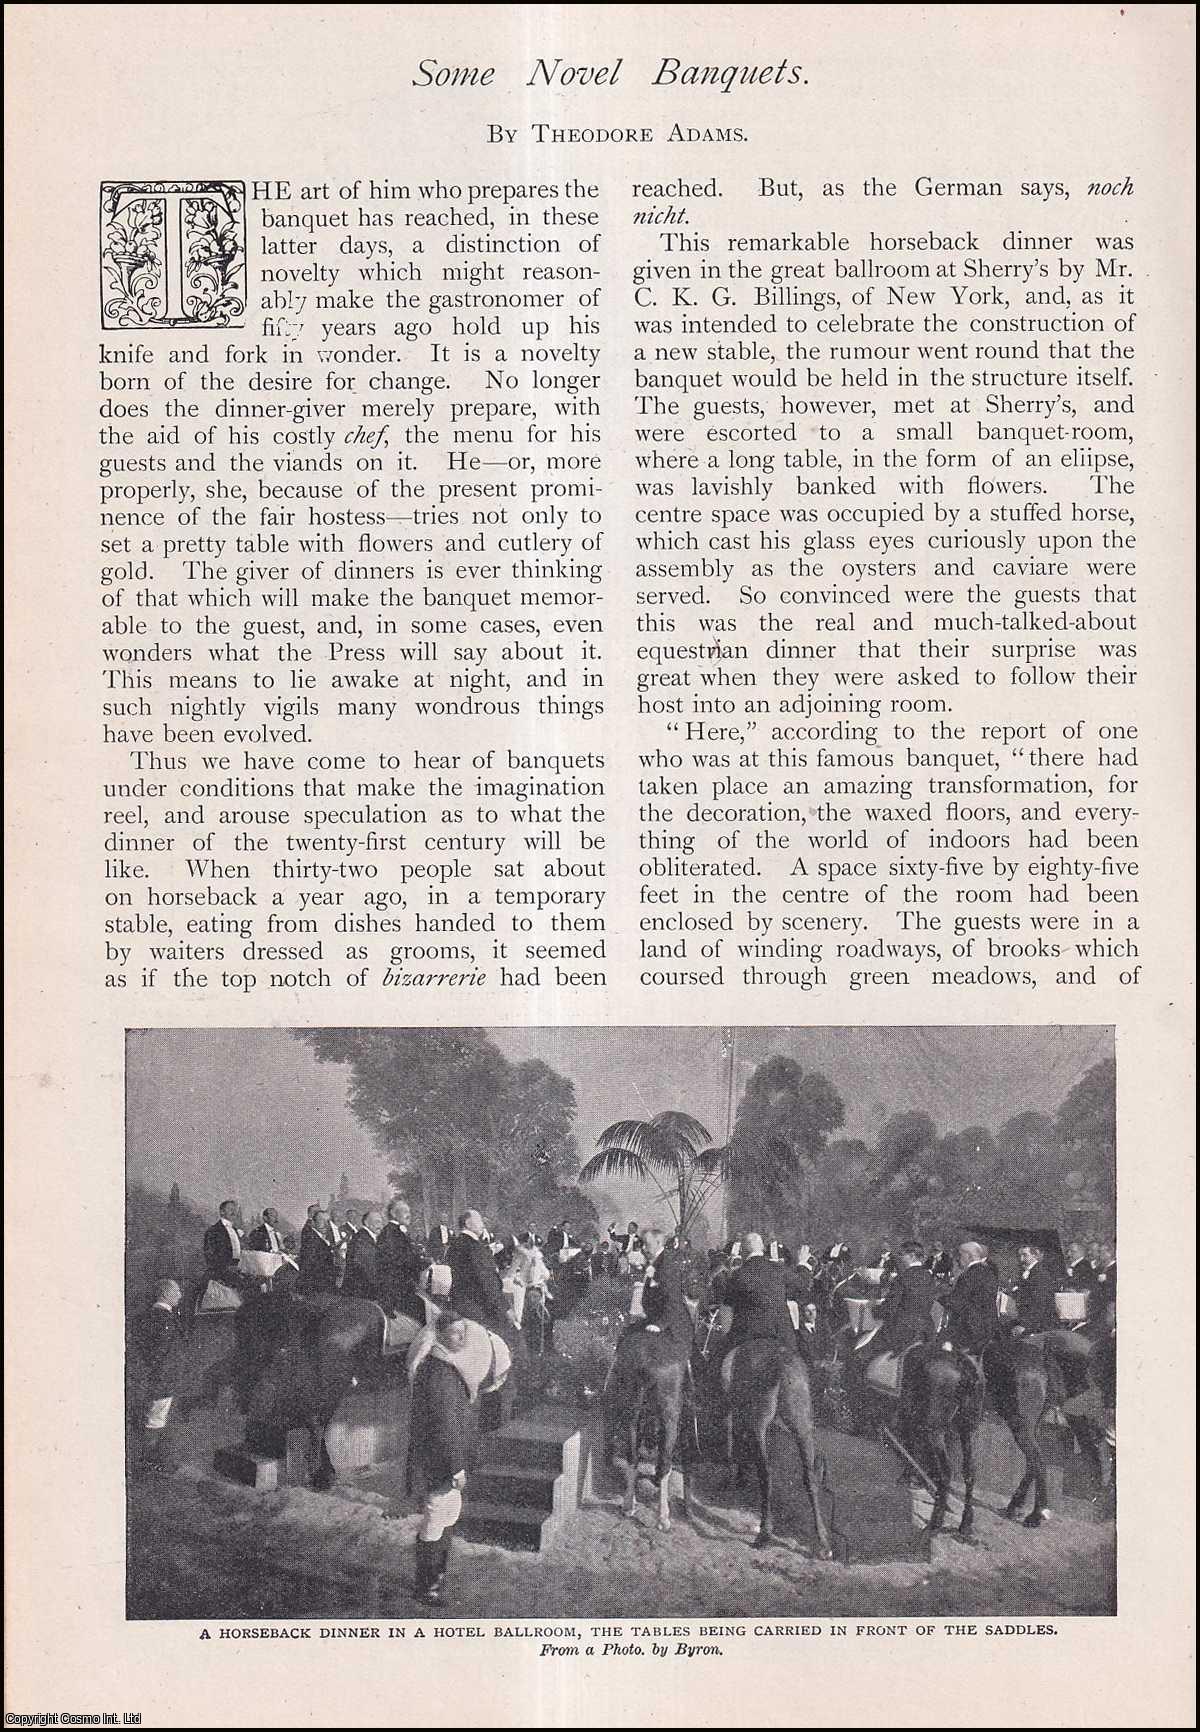 Theodore Adams - Some Novel Banquets : the New York Equestrian Club, the table representing a horse's head ; the Kettle Club, which the Kettle in which they dined ; a dinner inside a easter egg & more. An uncommon original article from The Strand Magazine, 1904.